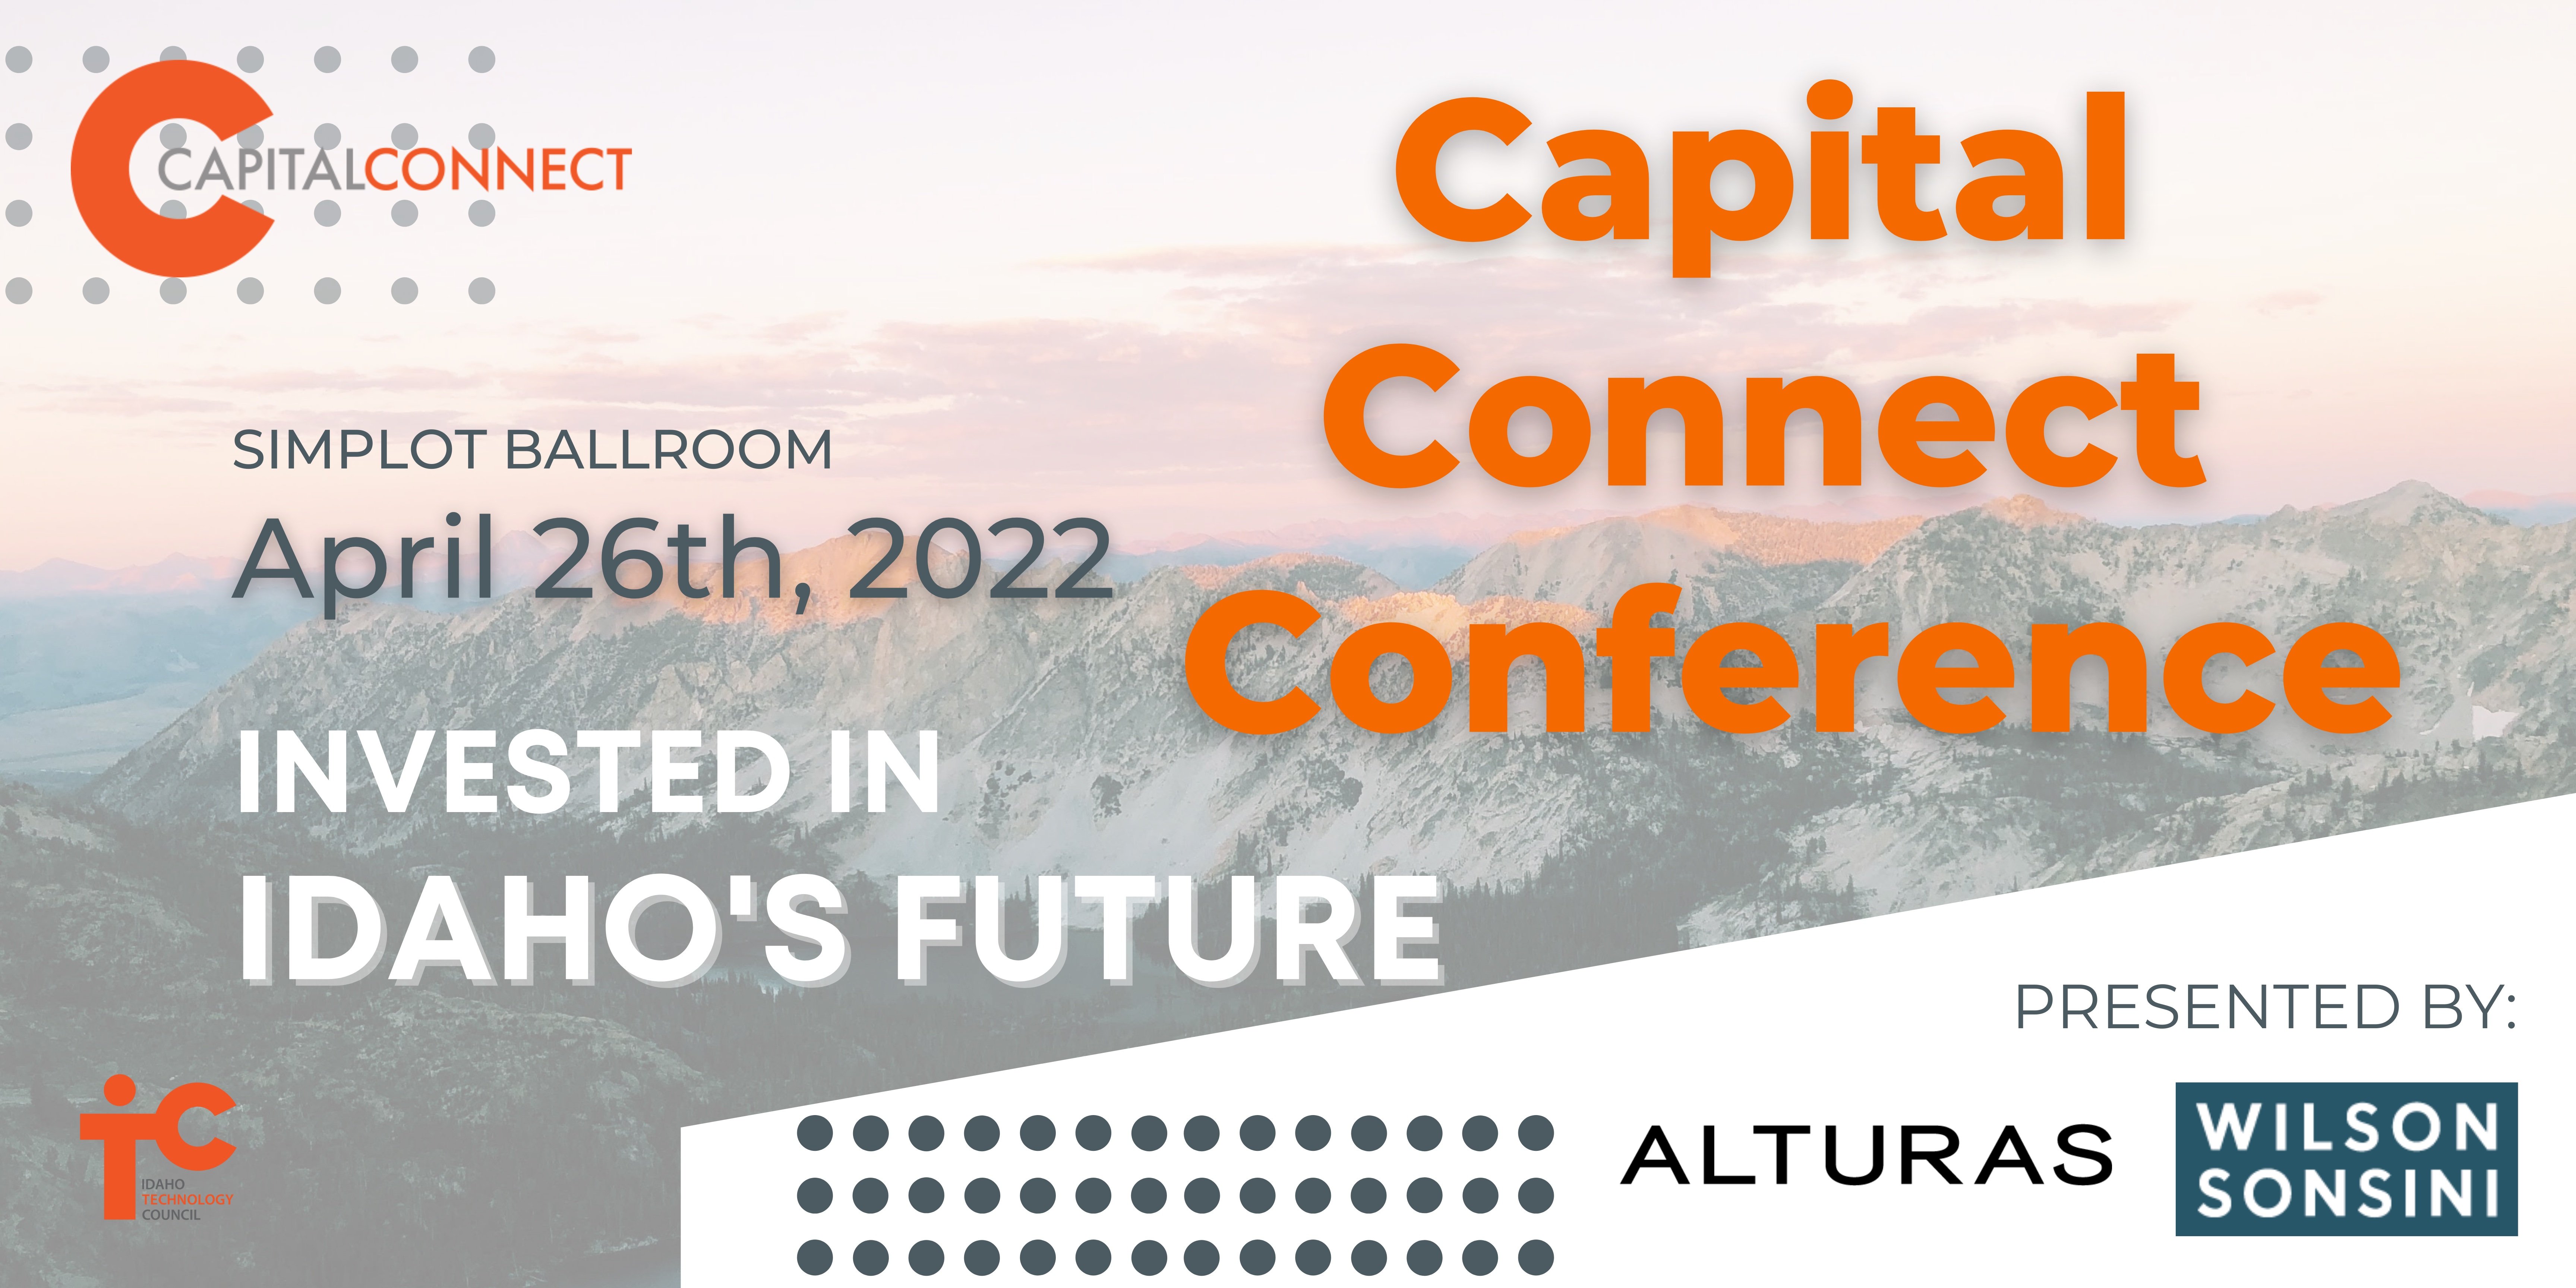 Press Release: Capital Connect Conference Announced for April 26